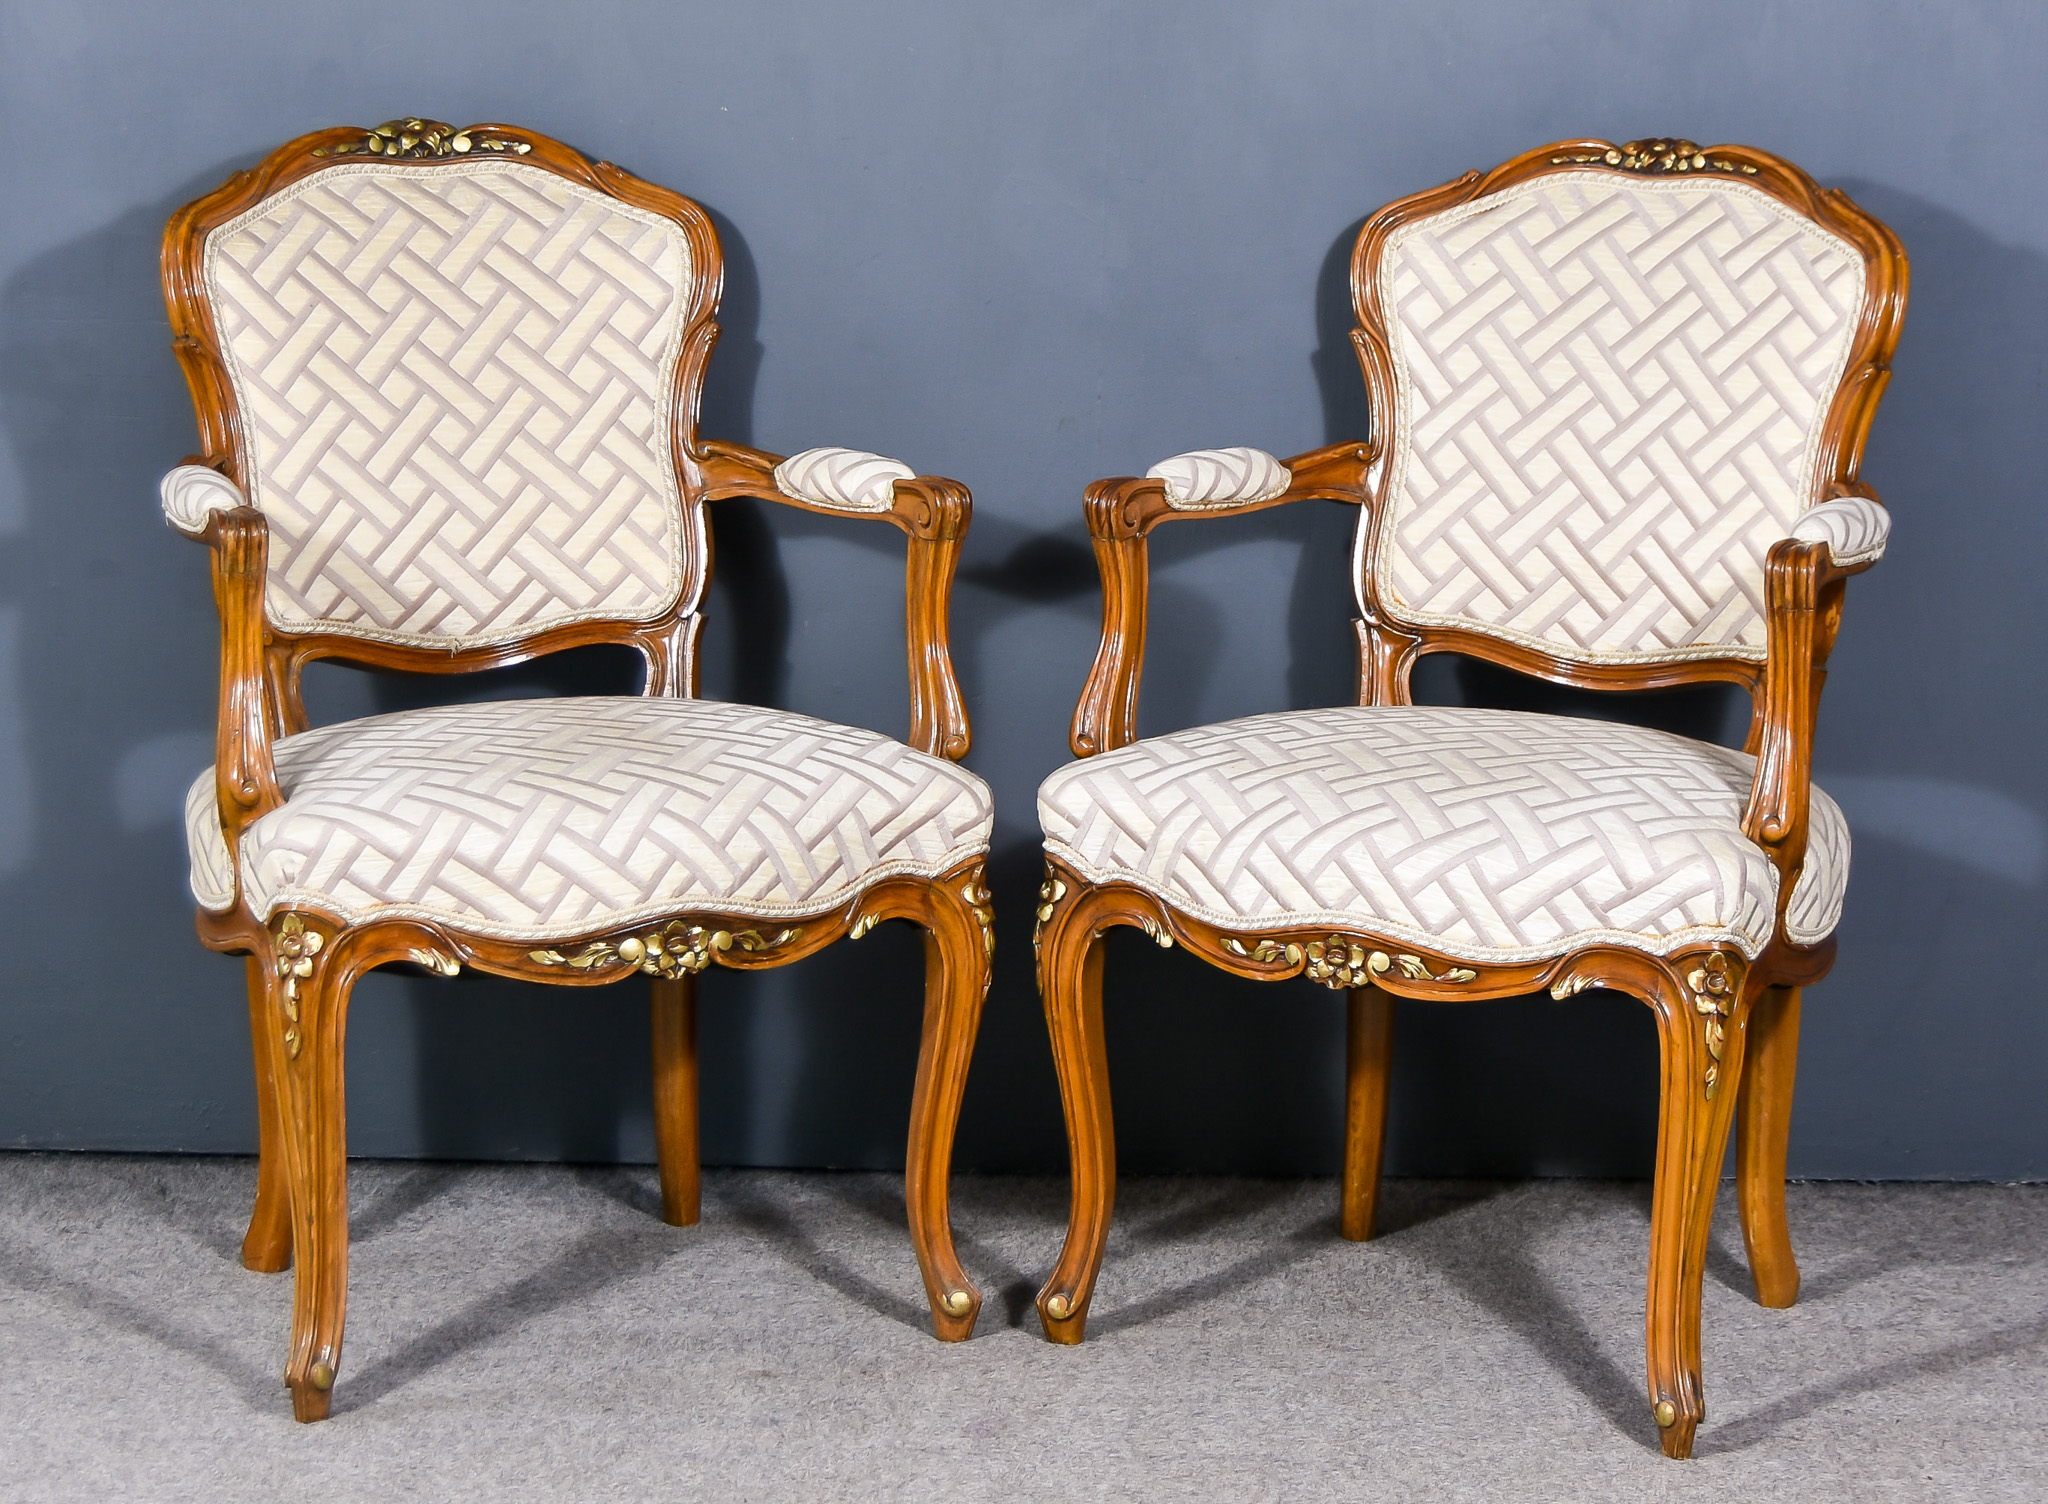 A Pair of French Walnut and Parcel Gilt Fauteuils of "Louis XV" Design, with shaped and moulded